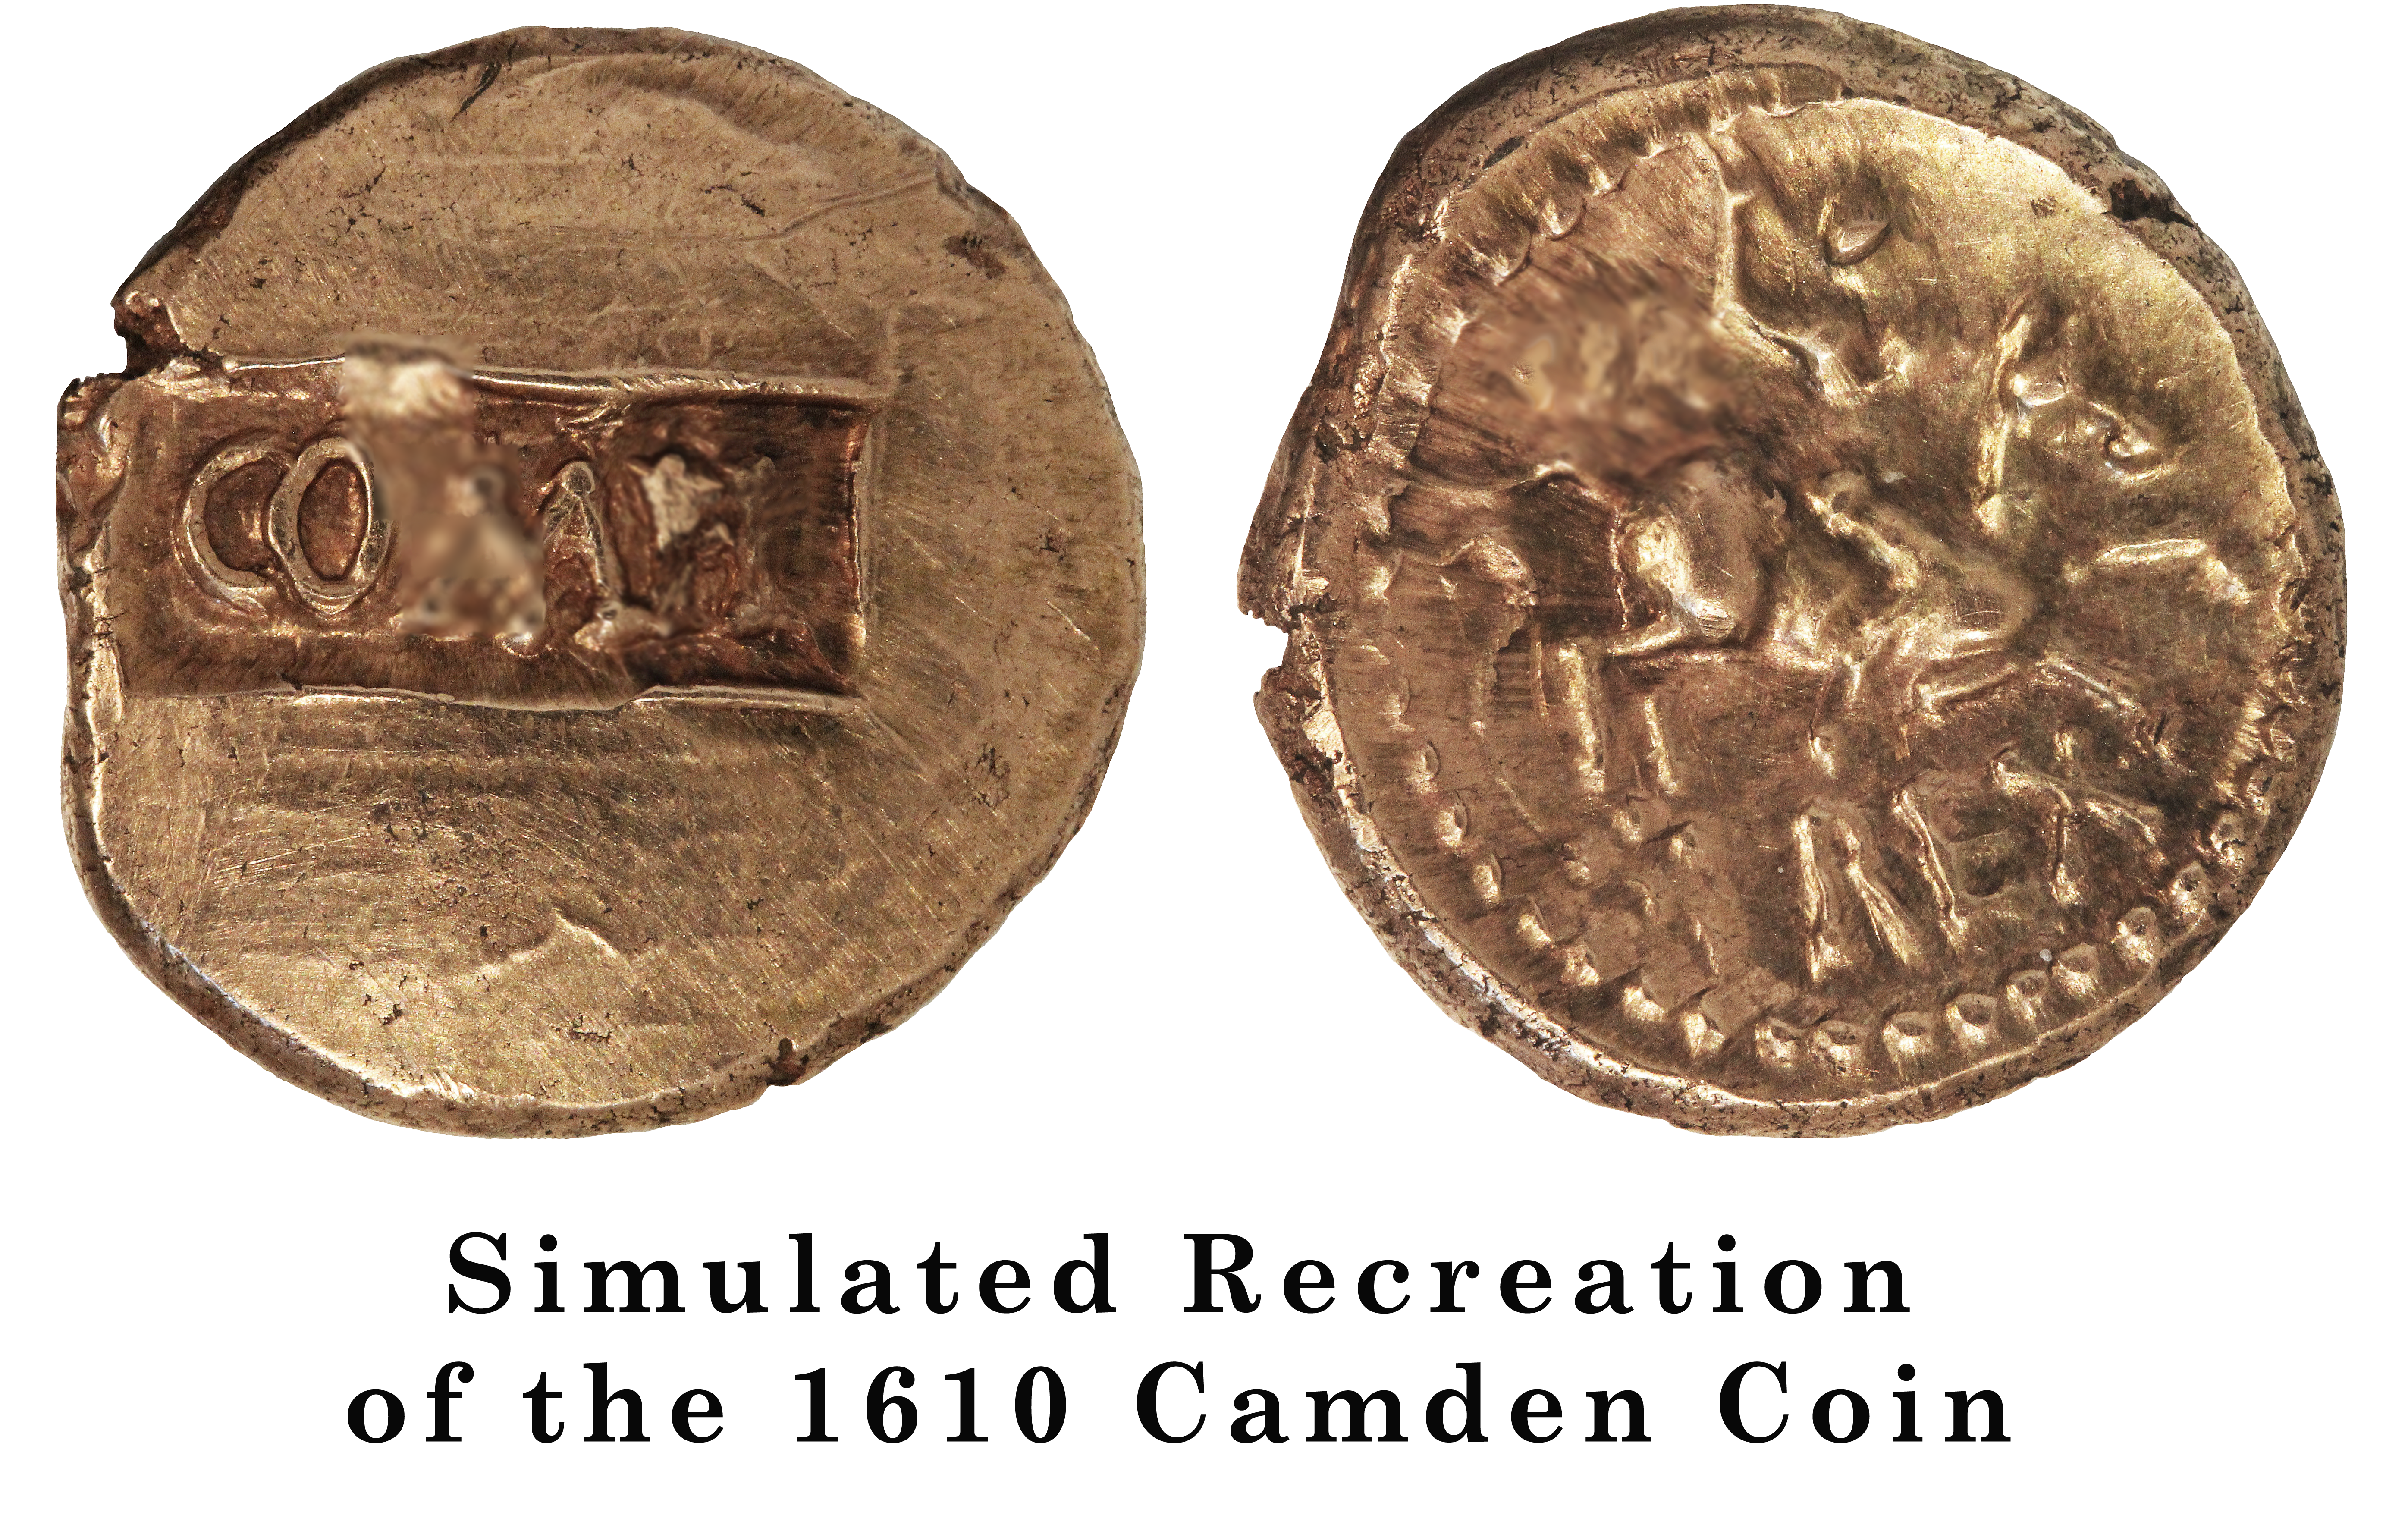 Simulated Recreation of the 1610 Camden Coin